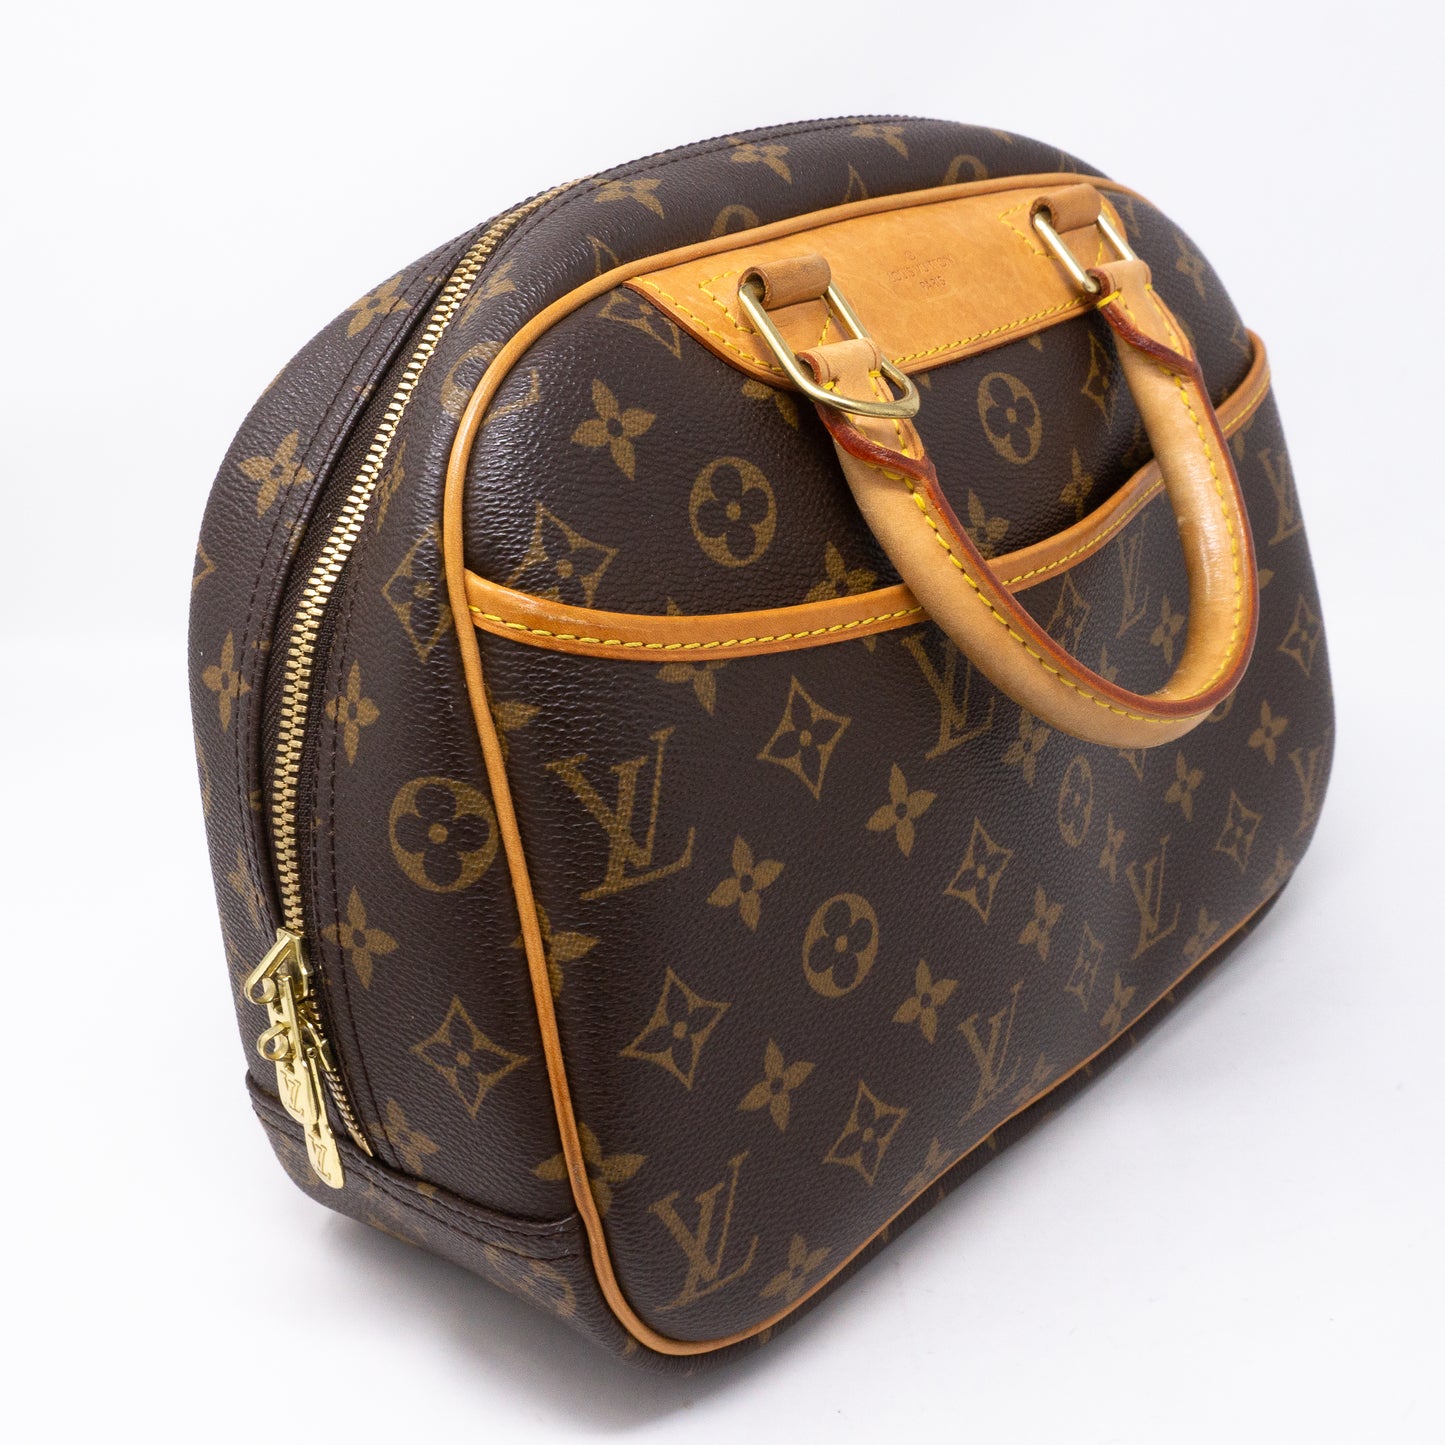 Louis Vuitton Trouville PM in monogram - Bags of CharmBags of Charm